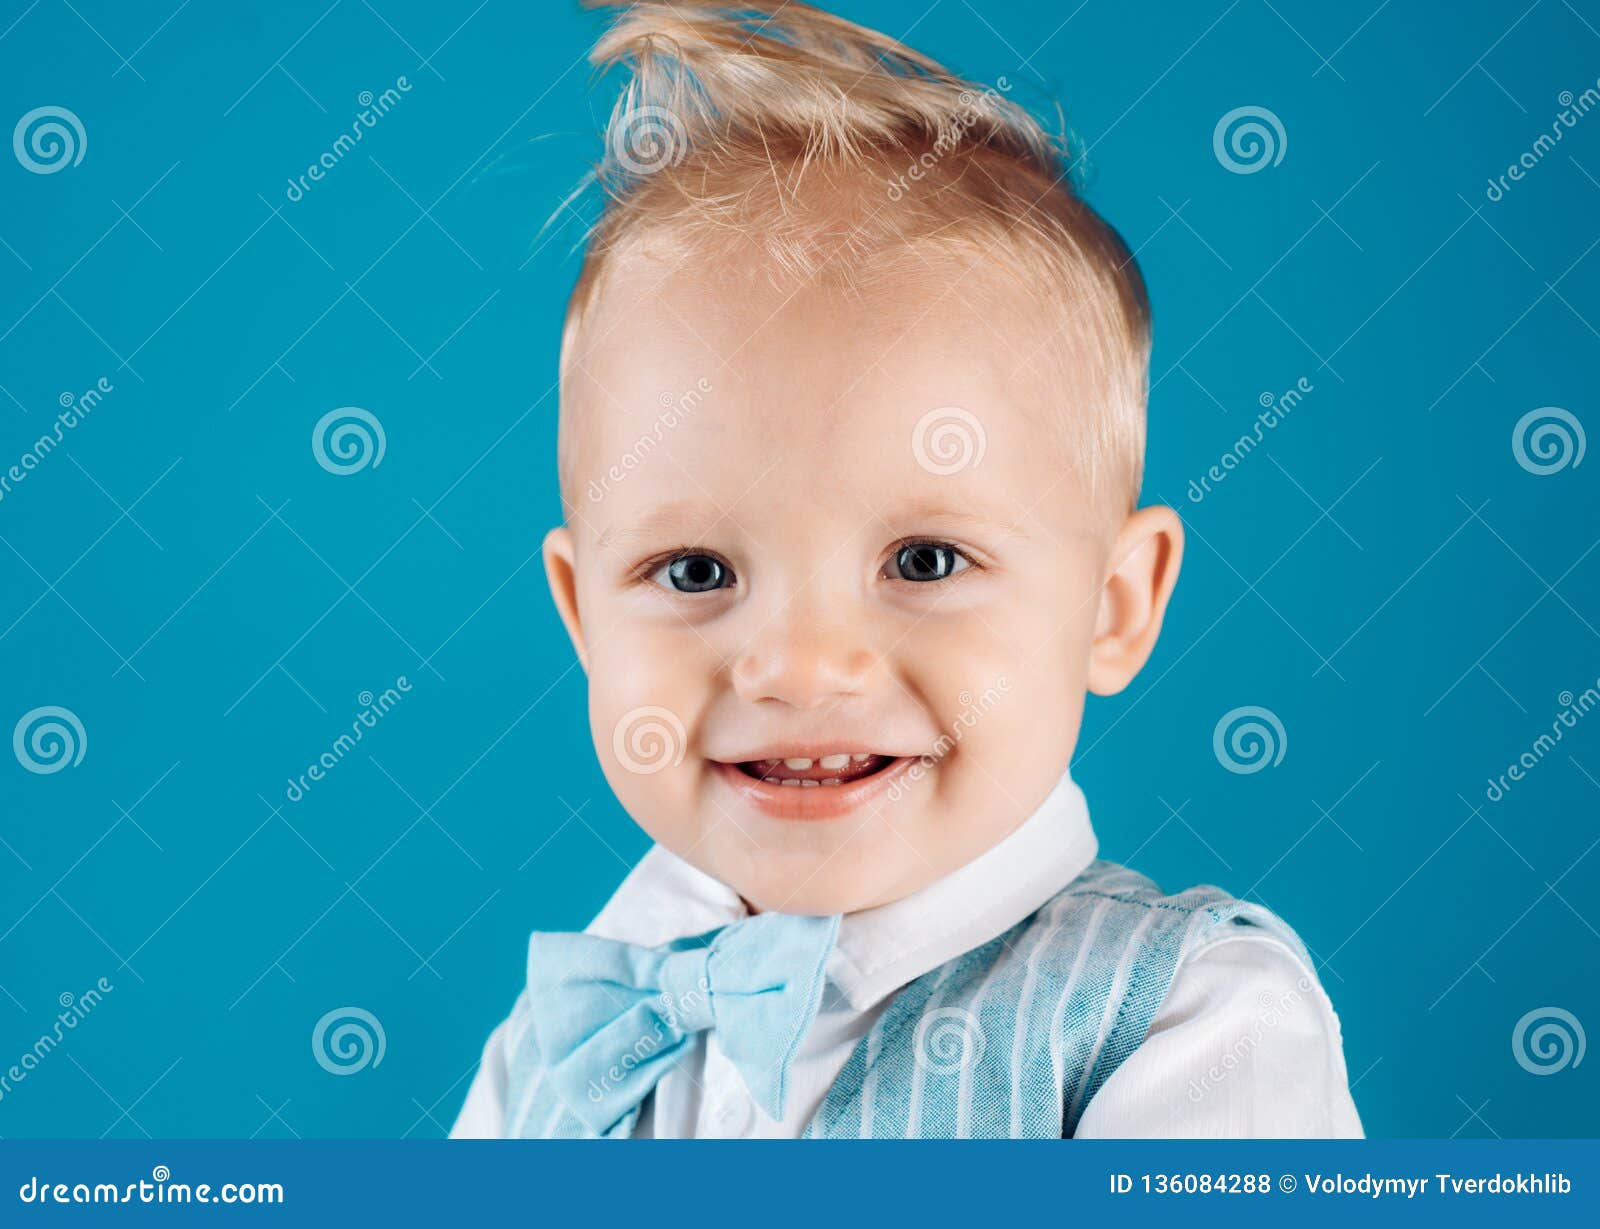 Healthy Haircare Tips For Kids Boy Child With Stylish Blond